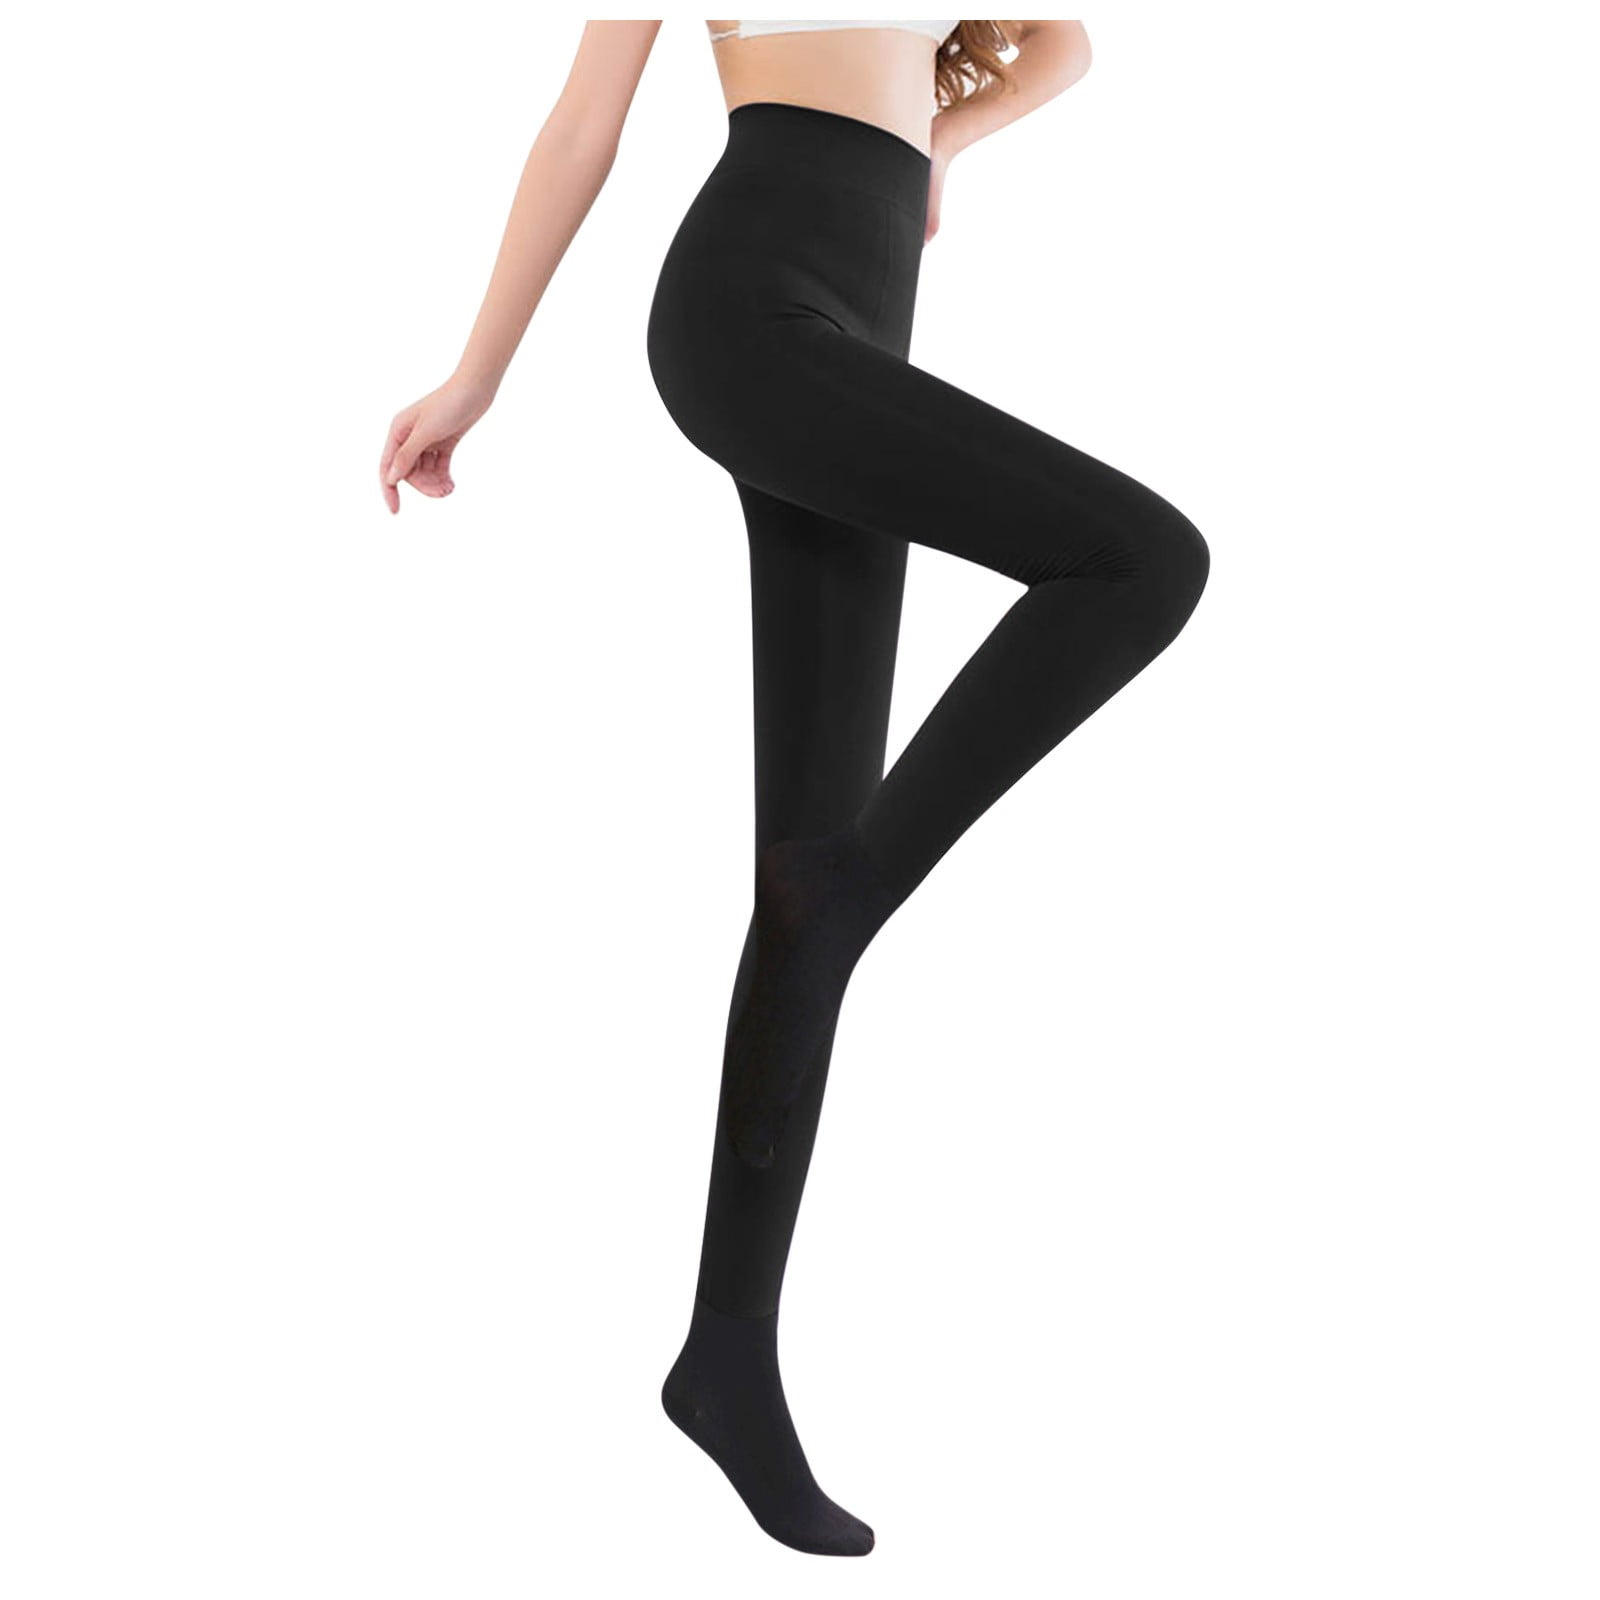 Wefuesd Leggings For Women Fashion Women Brushed Stretch Lined Thick Tights Warm Winter Pants